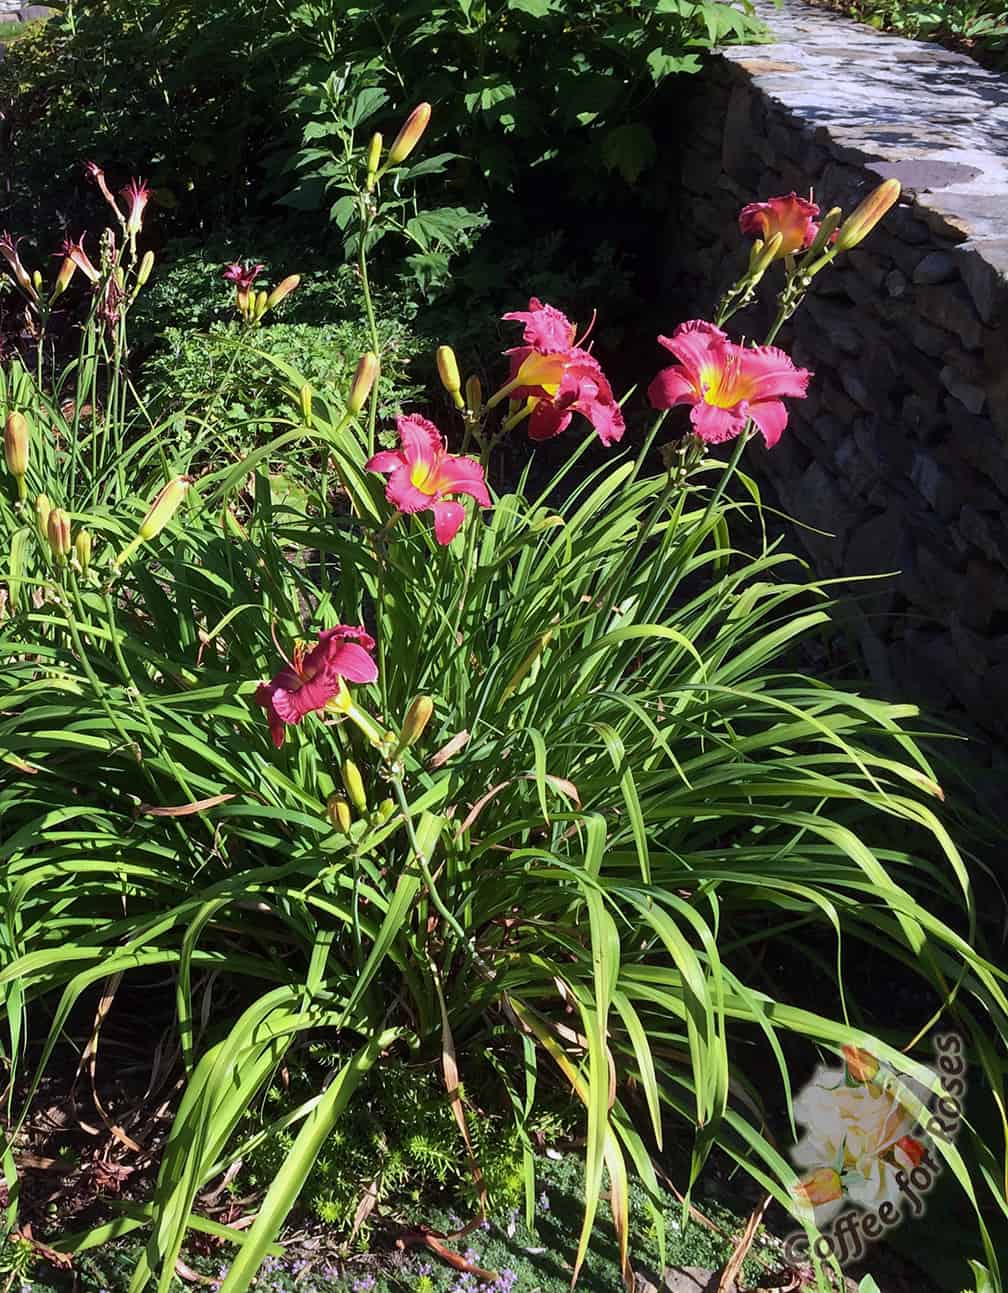 This plant shows how much better early flowering daylilies look once those stems and seed pods are removed.